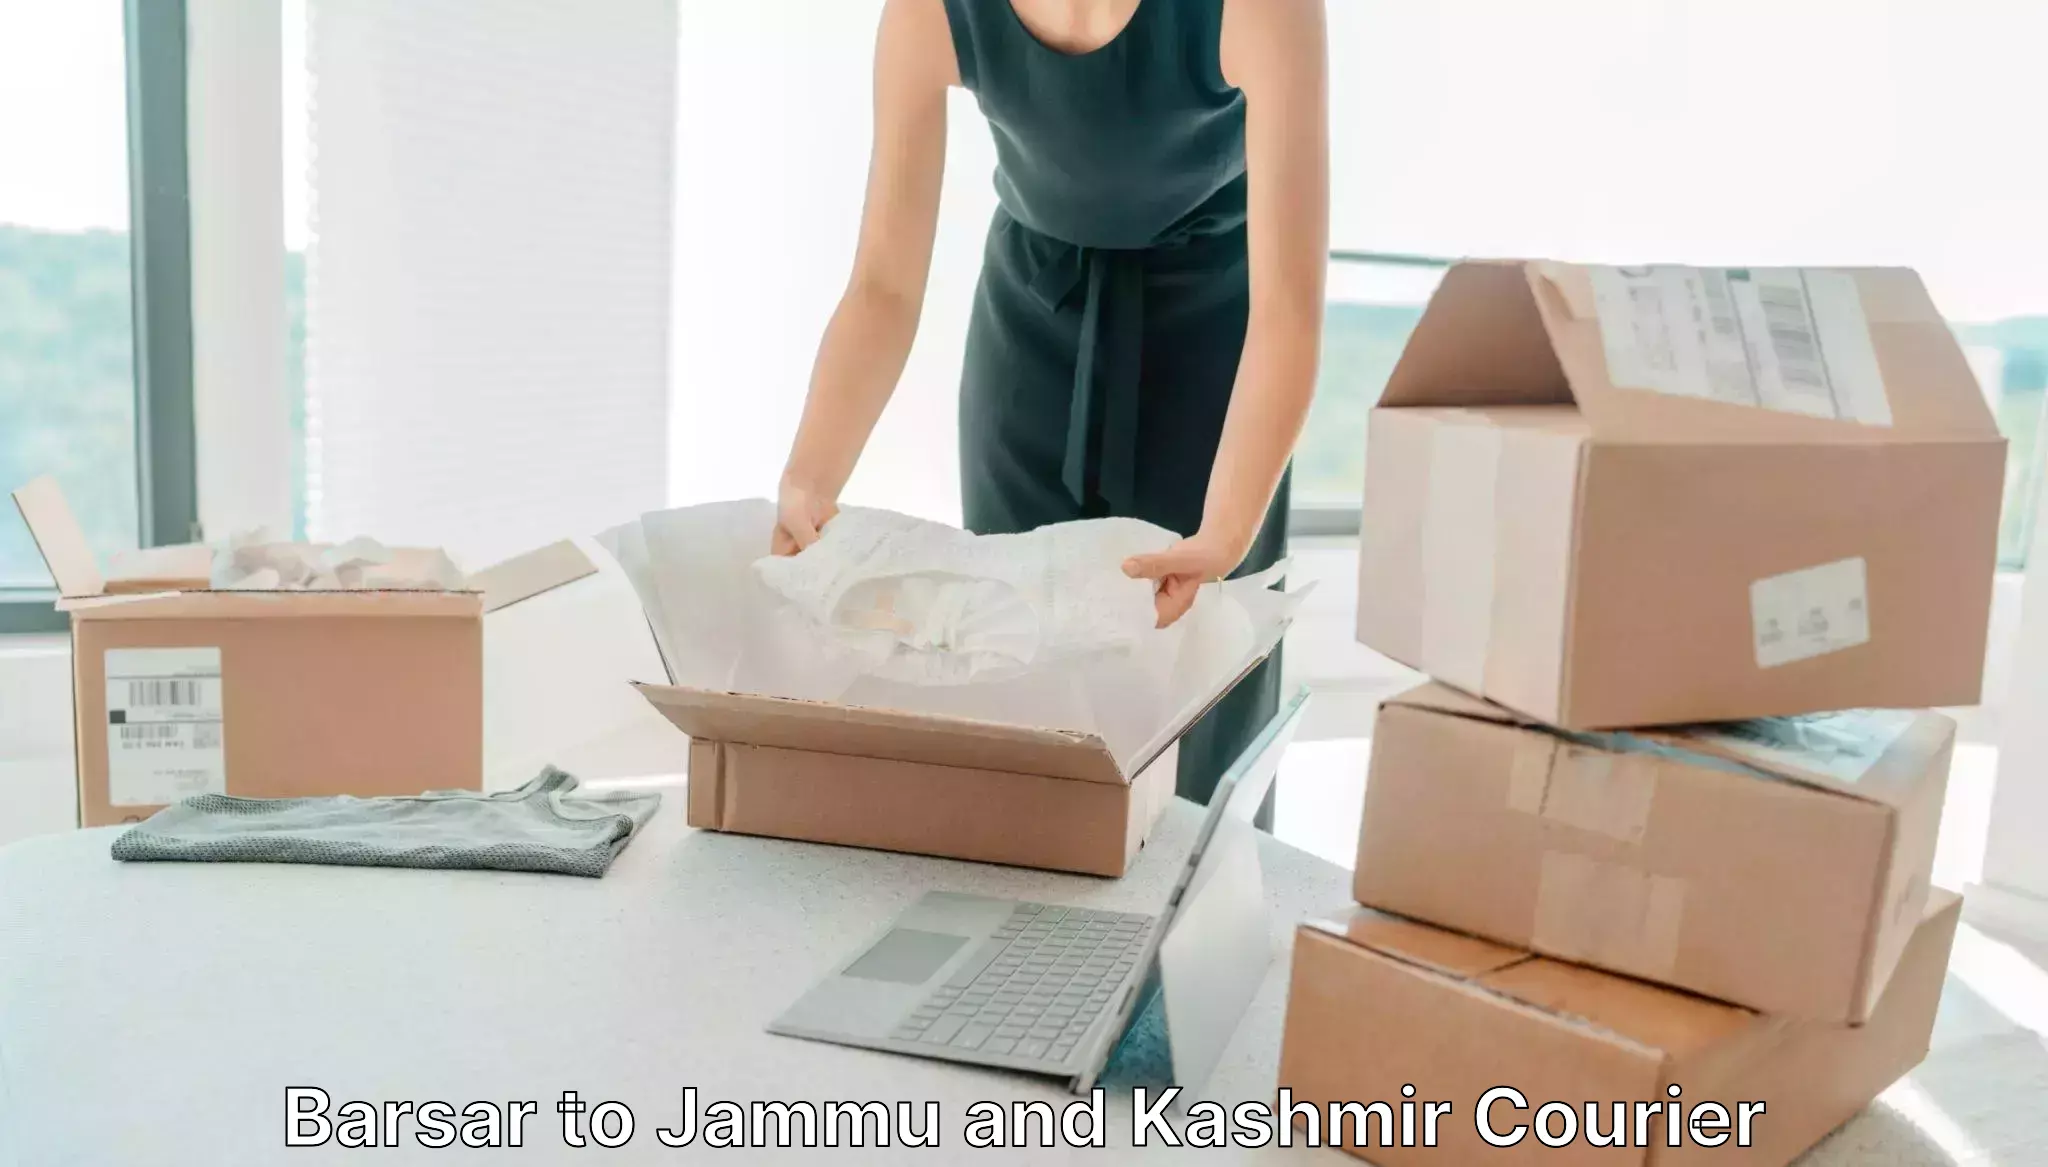 International courier networks Barsar to Pulwama